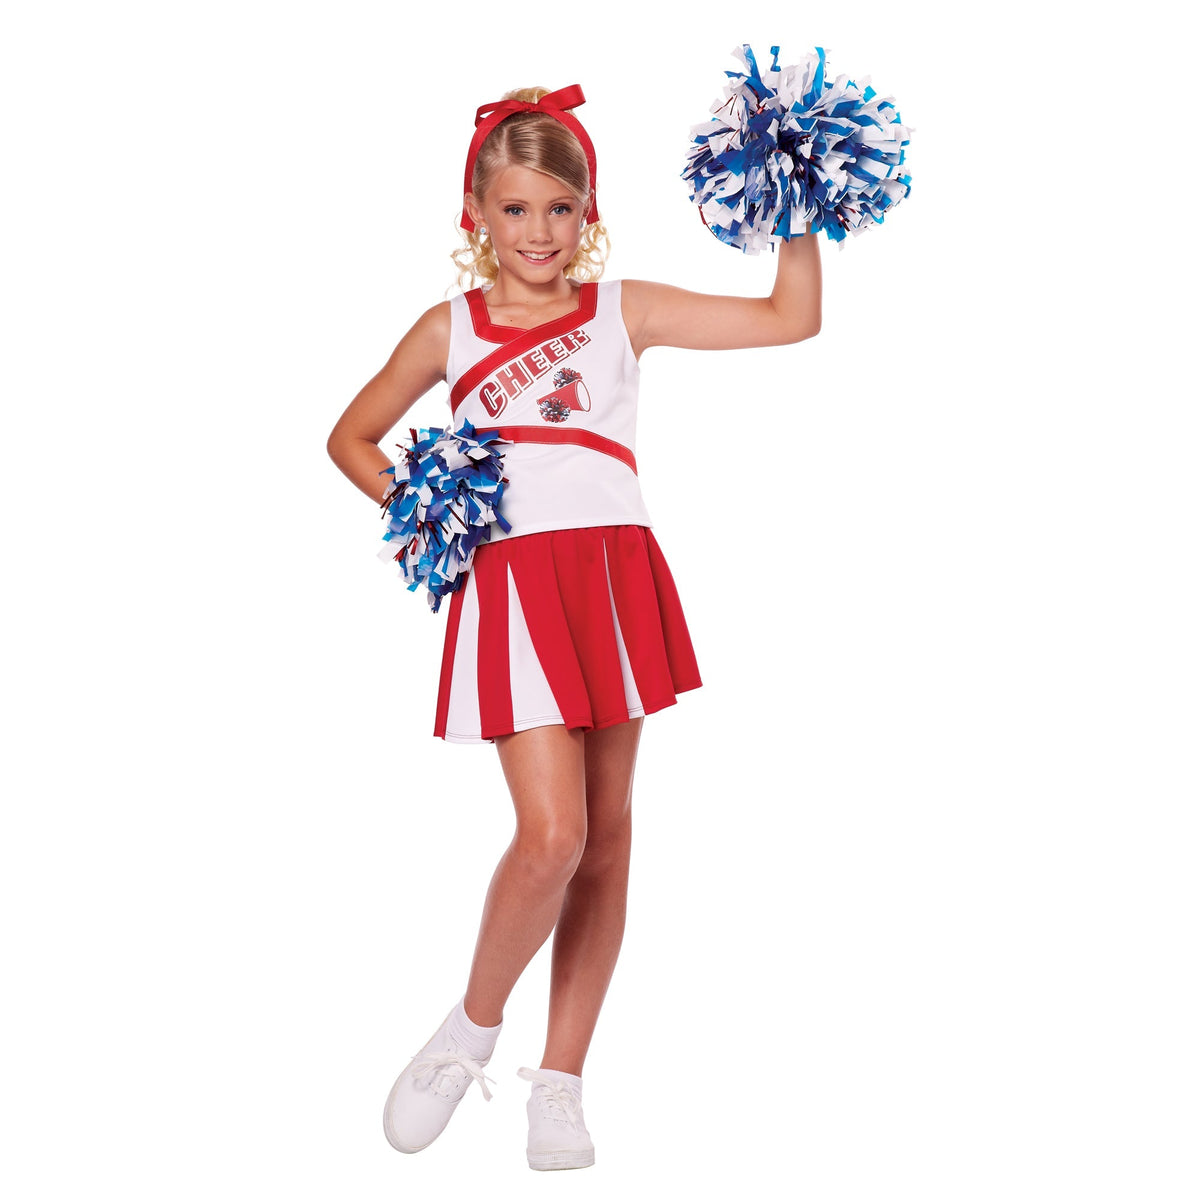 CALIFORNIA COSTUMES Costumes Go Team Cheerleader Costume for Kids, Bleu and Red Dress With Pom Poms